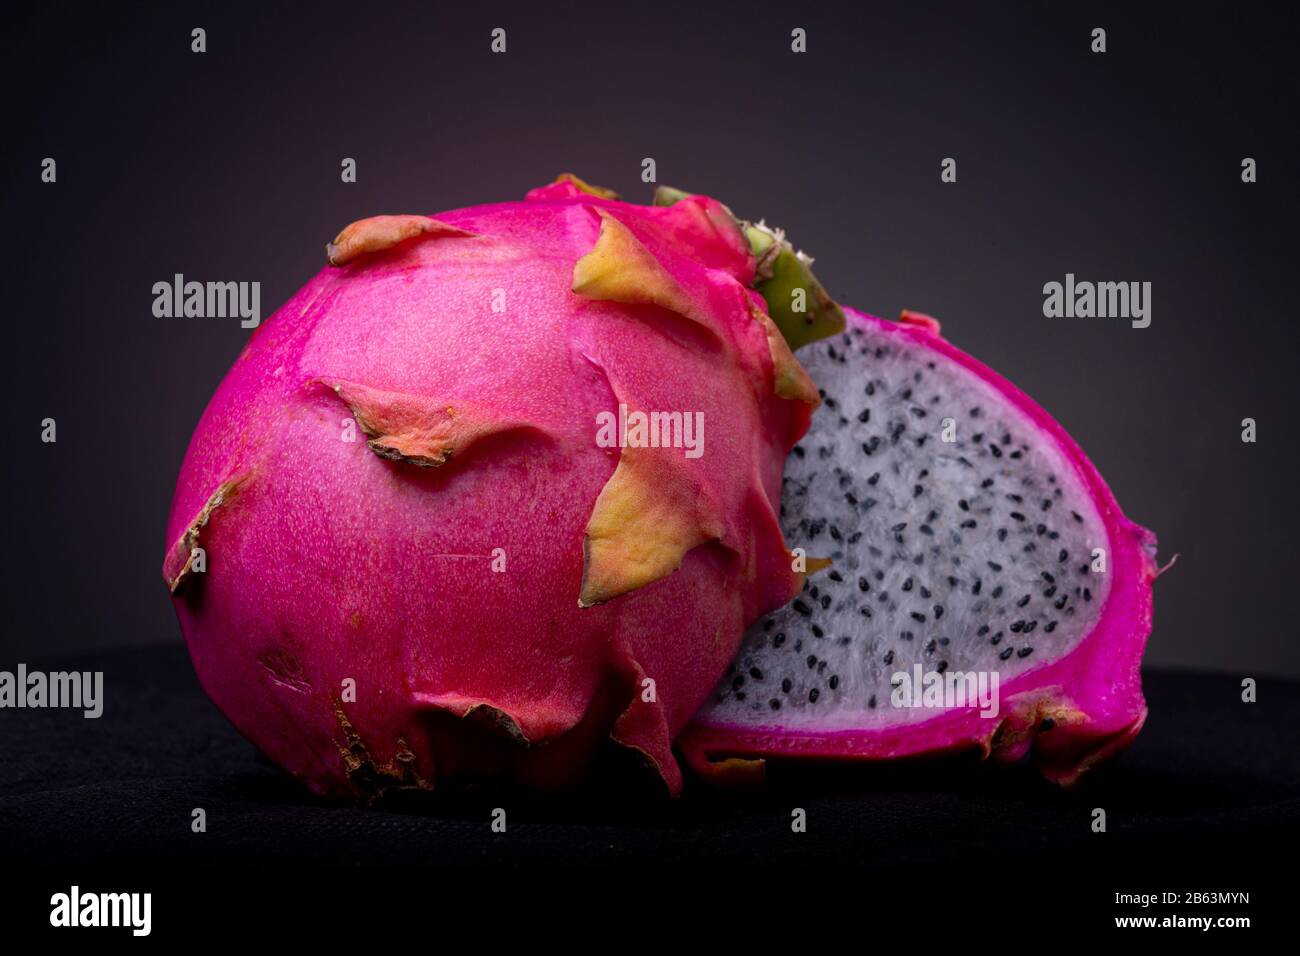 Close up of two halves of a white-fleshed Pitaya or Dragon fruit with the outer shell and also white pulp with black seeds insides on a black surface Stock Photo